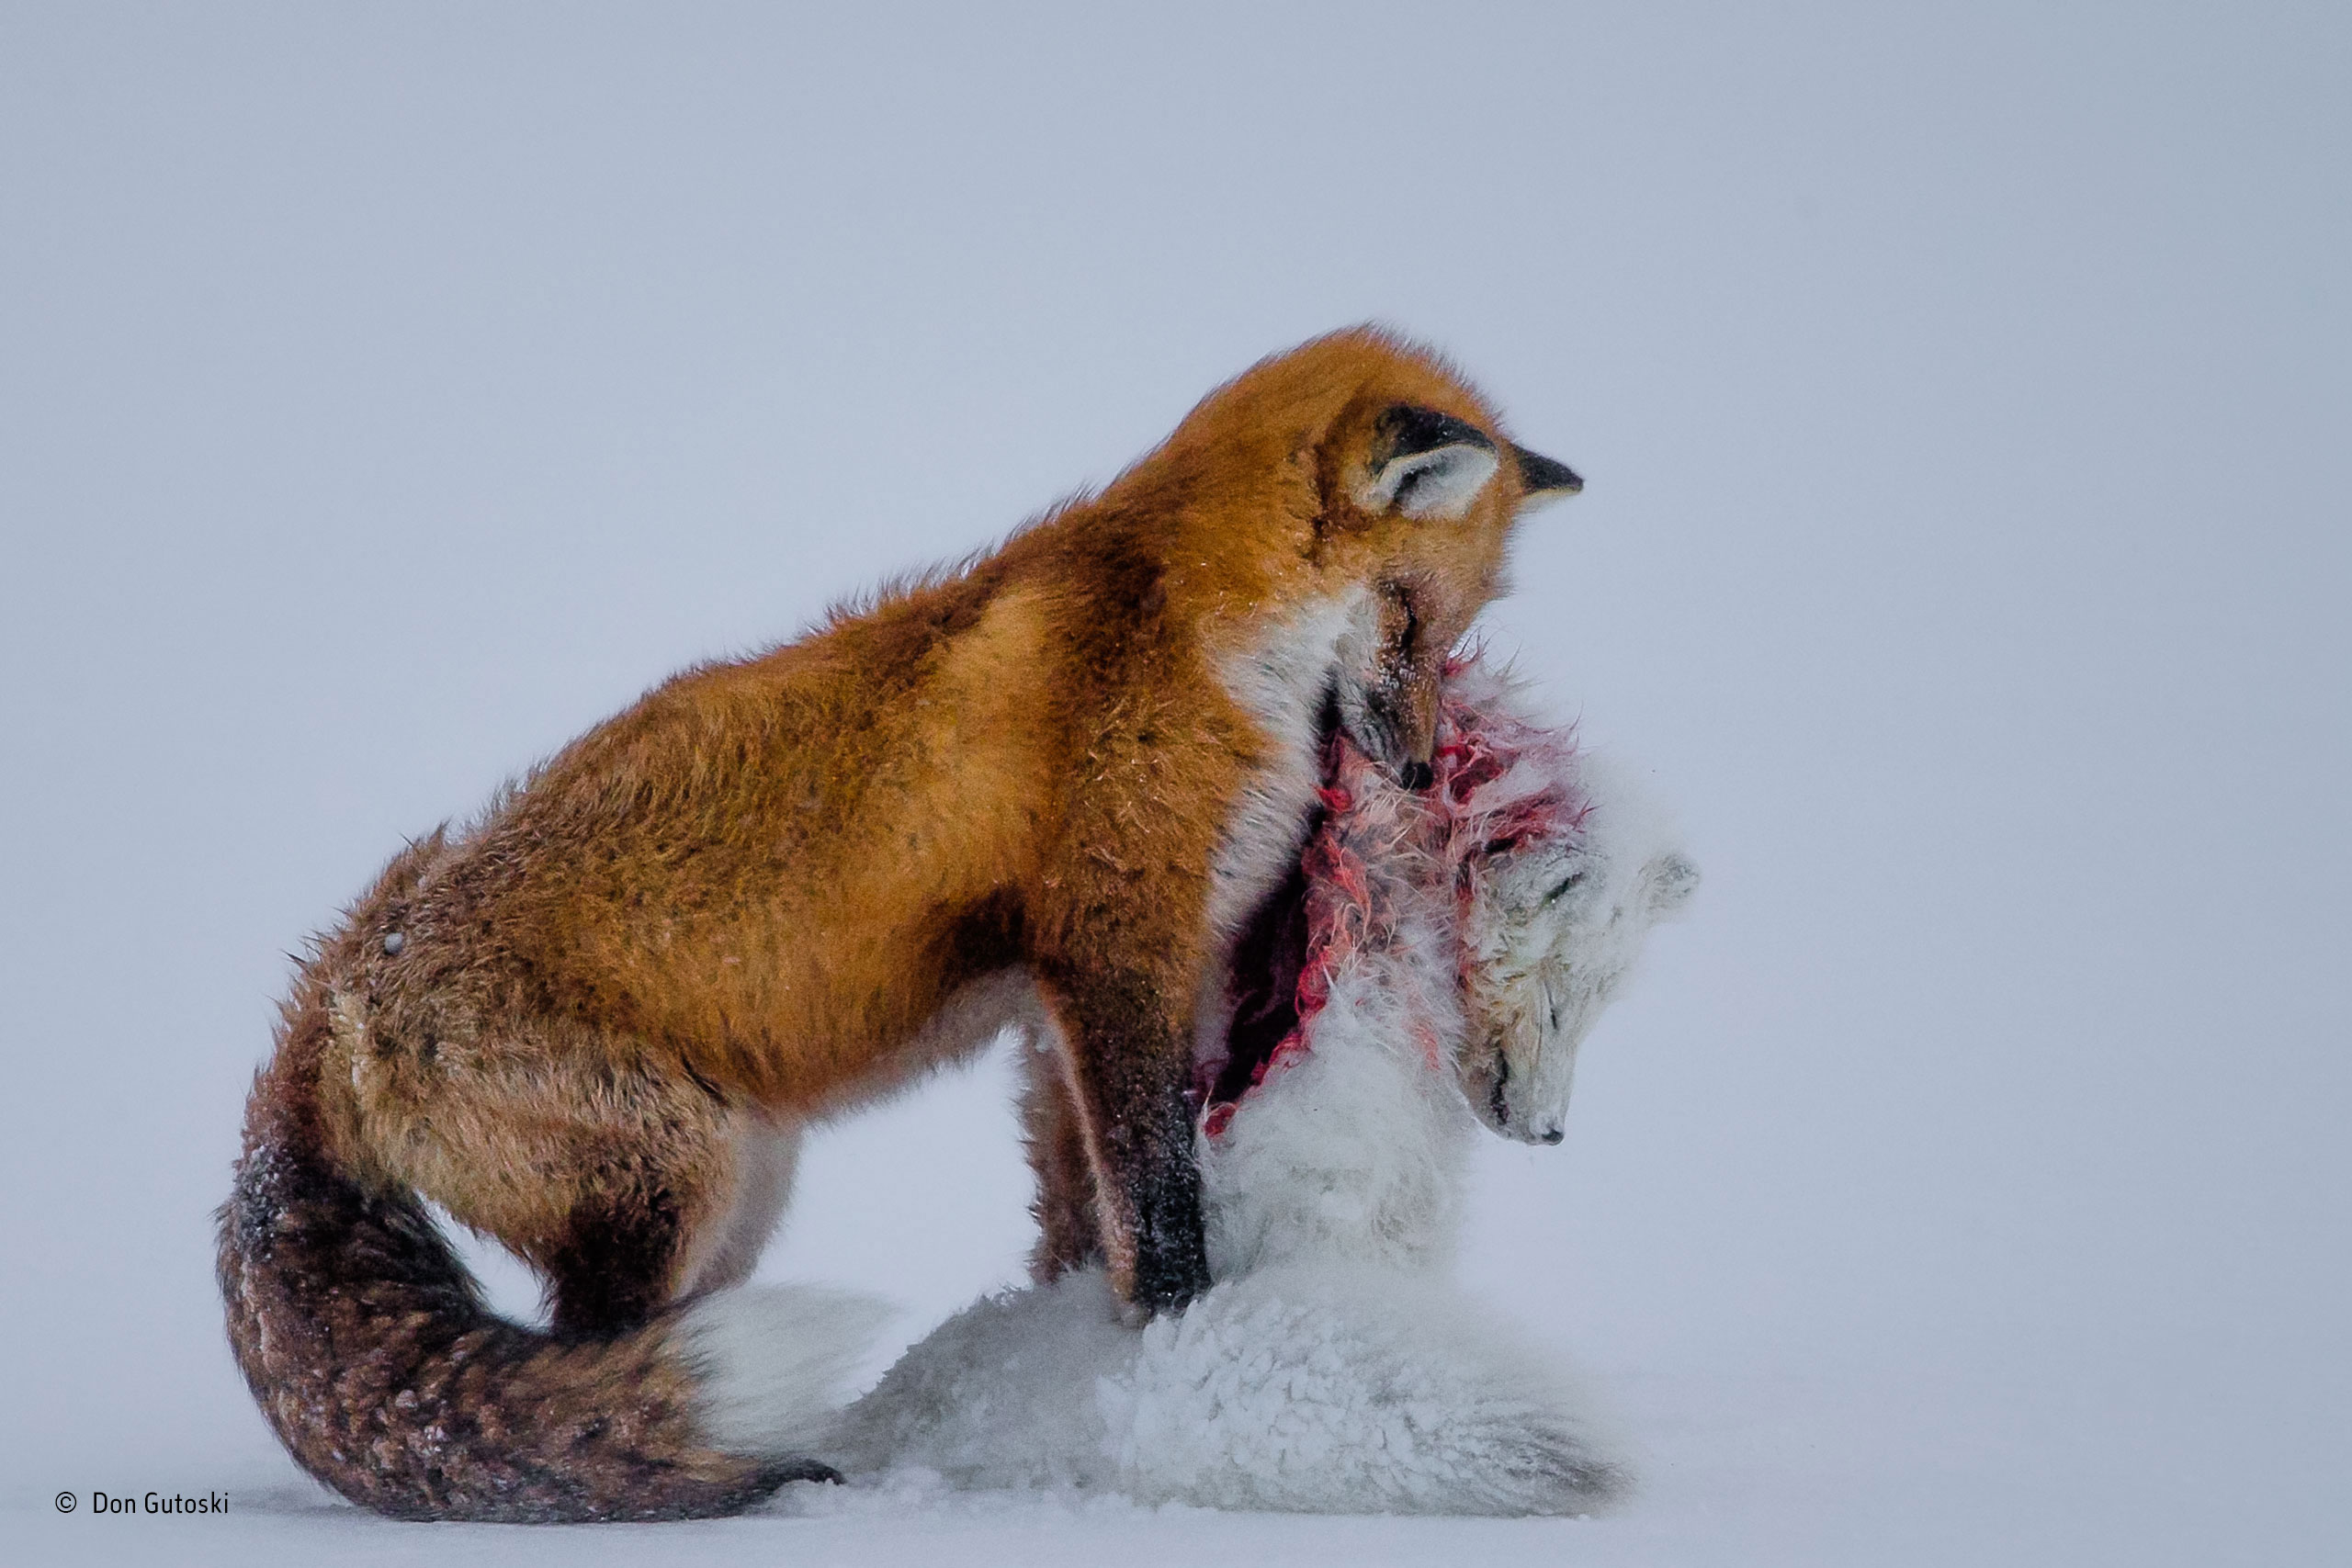 A red fox has attacked and killed its smaller relative, an Arctic fox, and is preparing to hide the remains under the ice to stop polar bears from finding them.